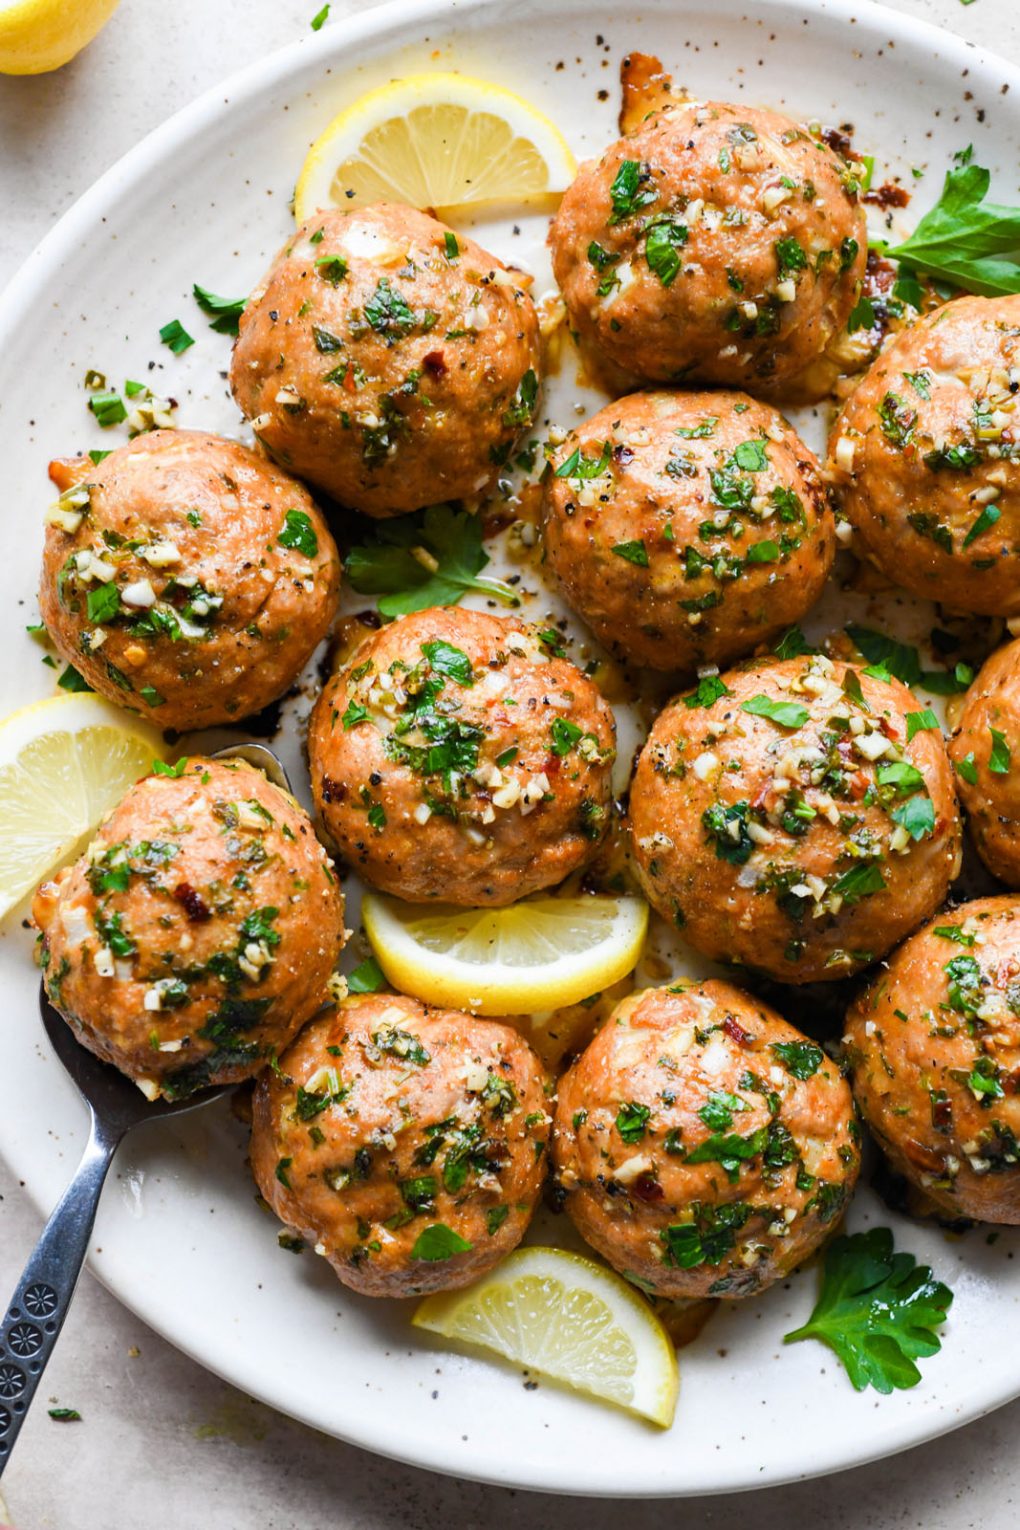 A large plate filled with large glistening herb flecked turkey meatballs drizzled with golden colored ghee and next to a few lemon slices and parsley leaves. One meatball is cut in half to reveal the interior. On a light colored speckled plate with a spoon slanted off the plate holding one meatball. 